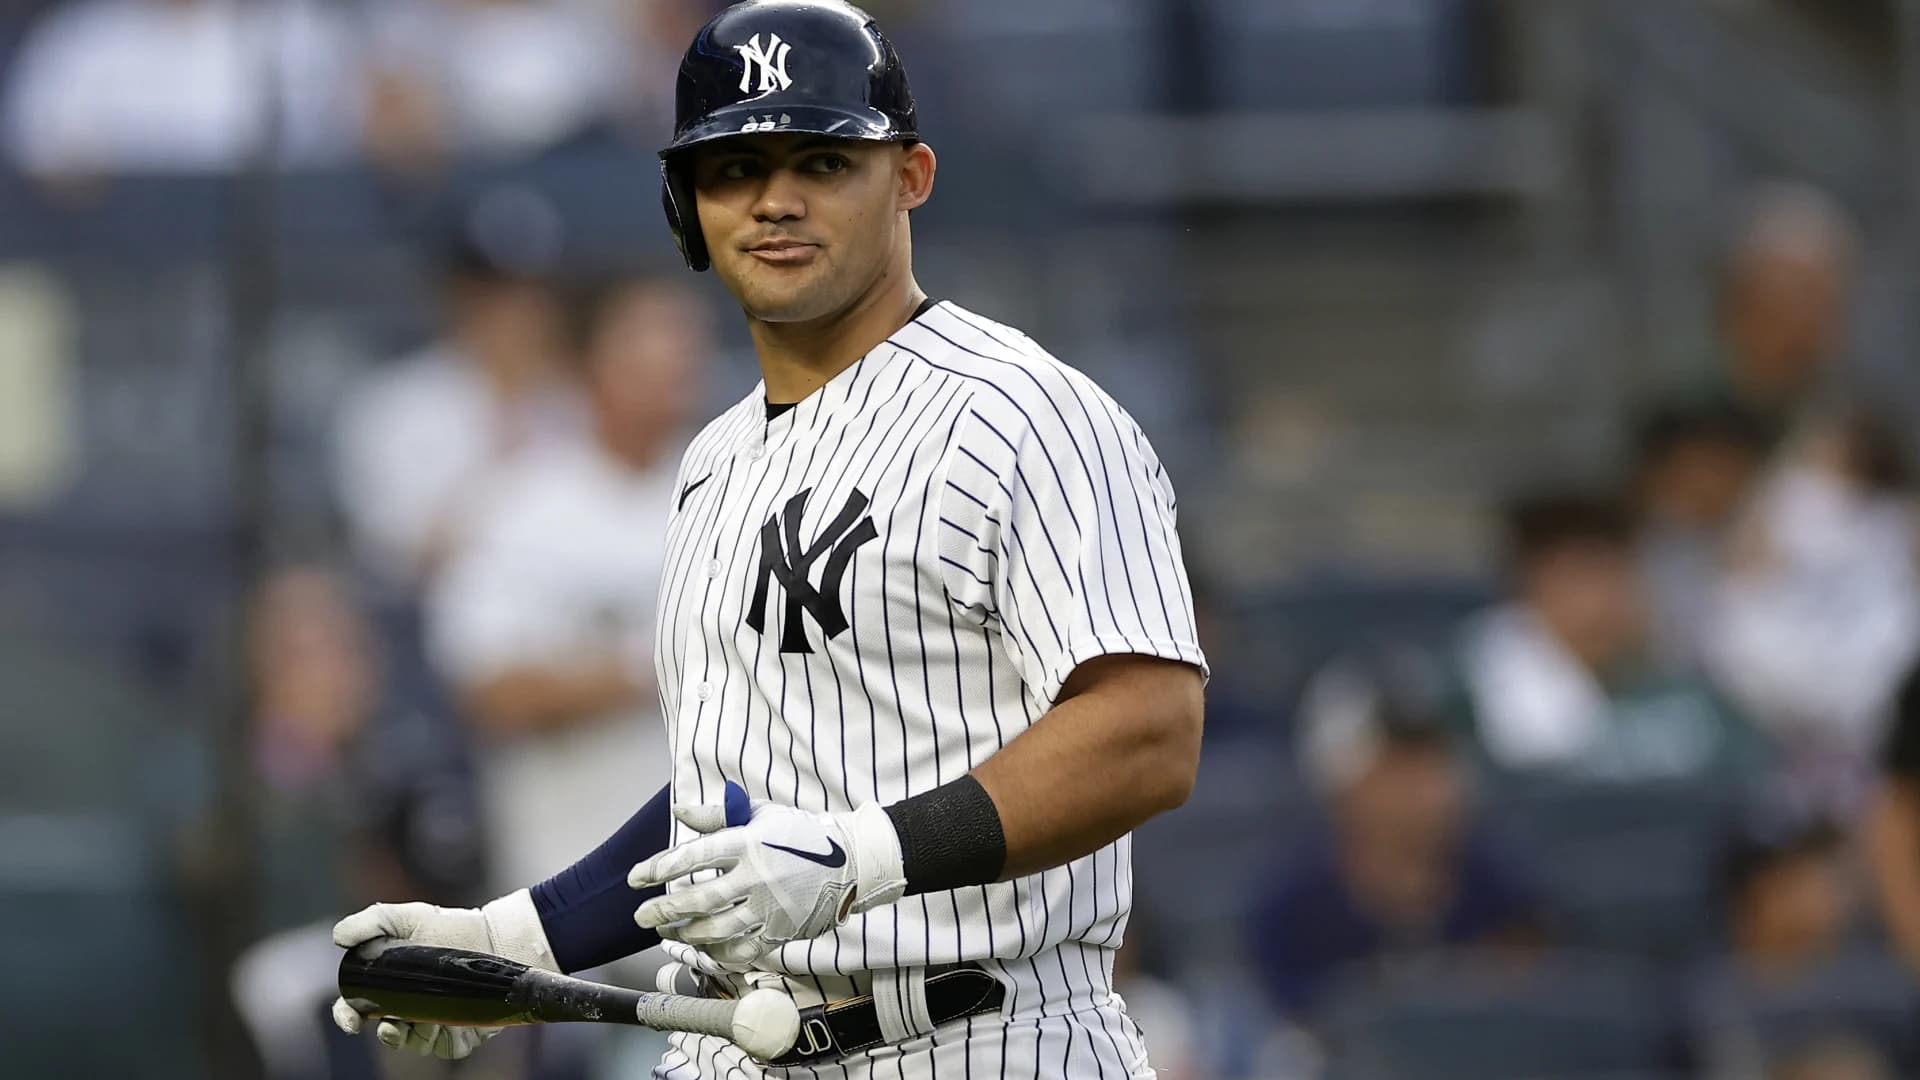 Yankees rookie outfielder Jasson Domínguez has torn elbow ligament, needs Tommy John surgery